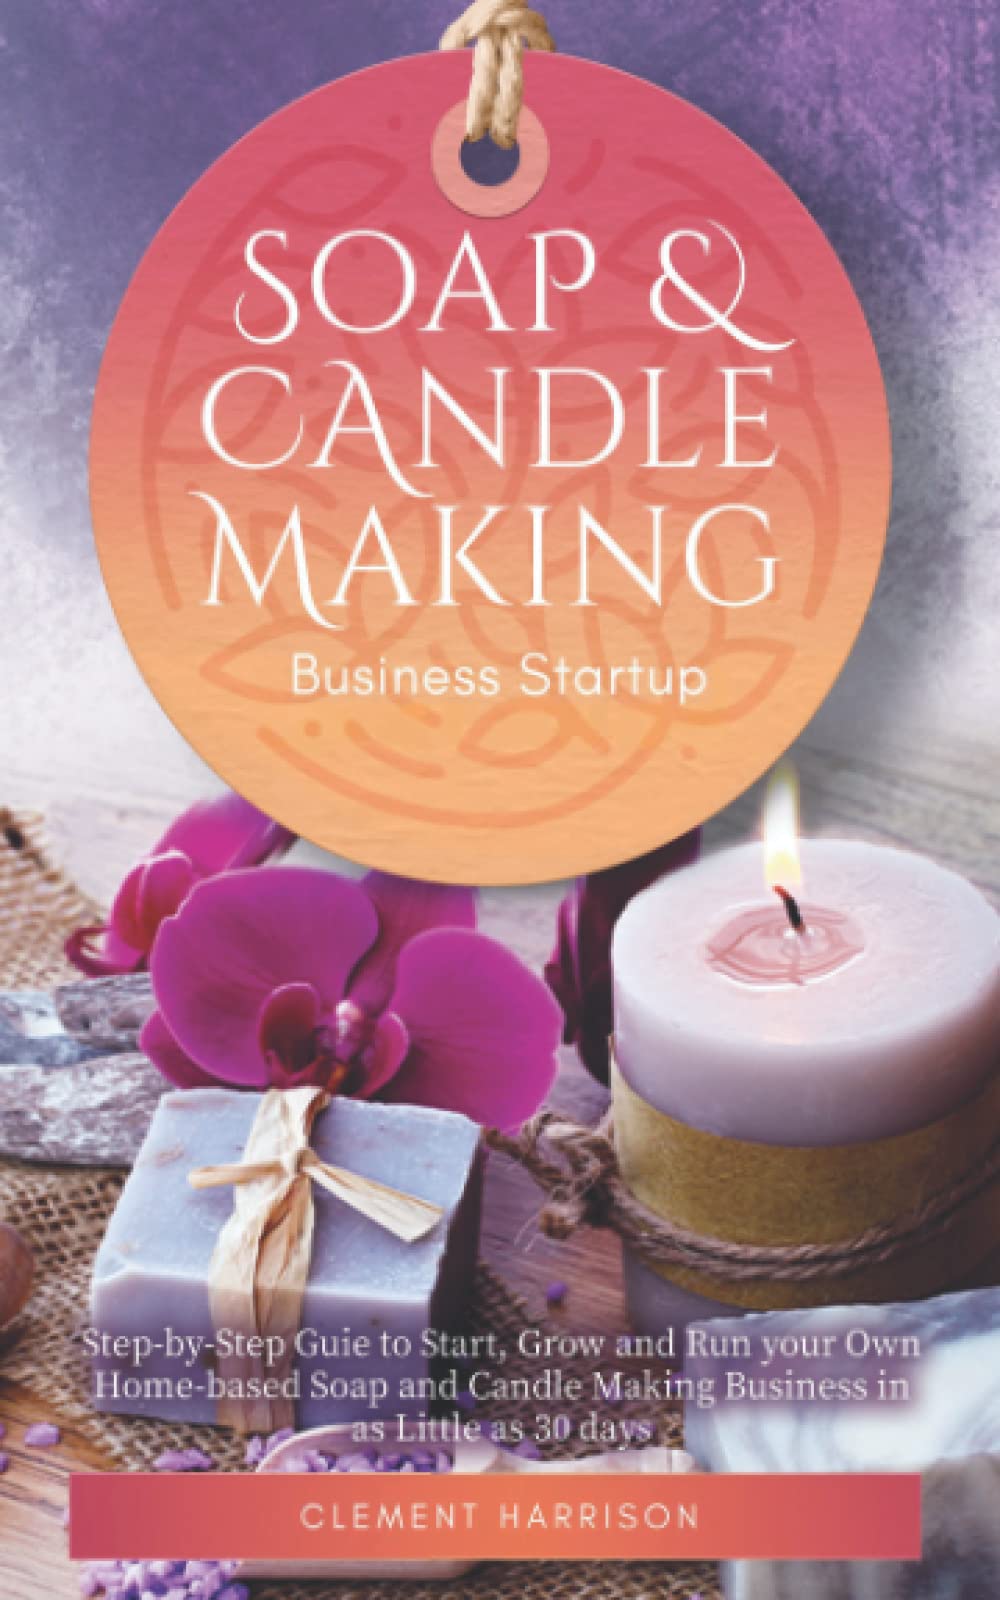 Soap and Candle Making Business Startup